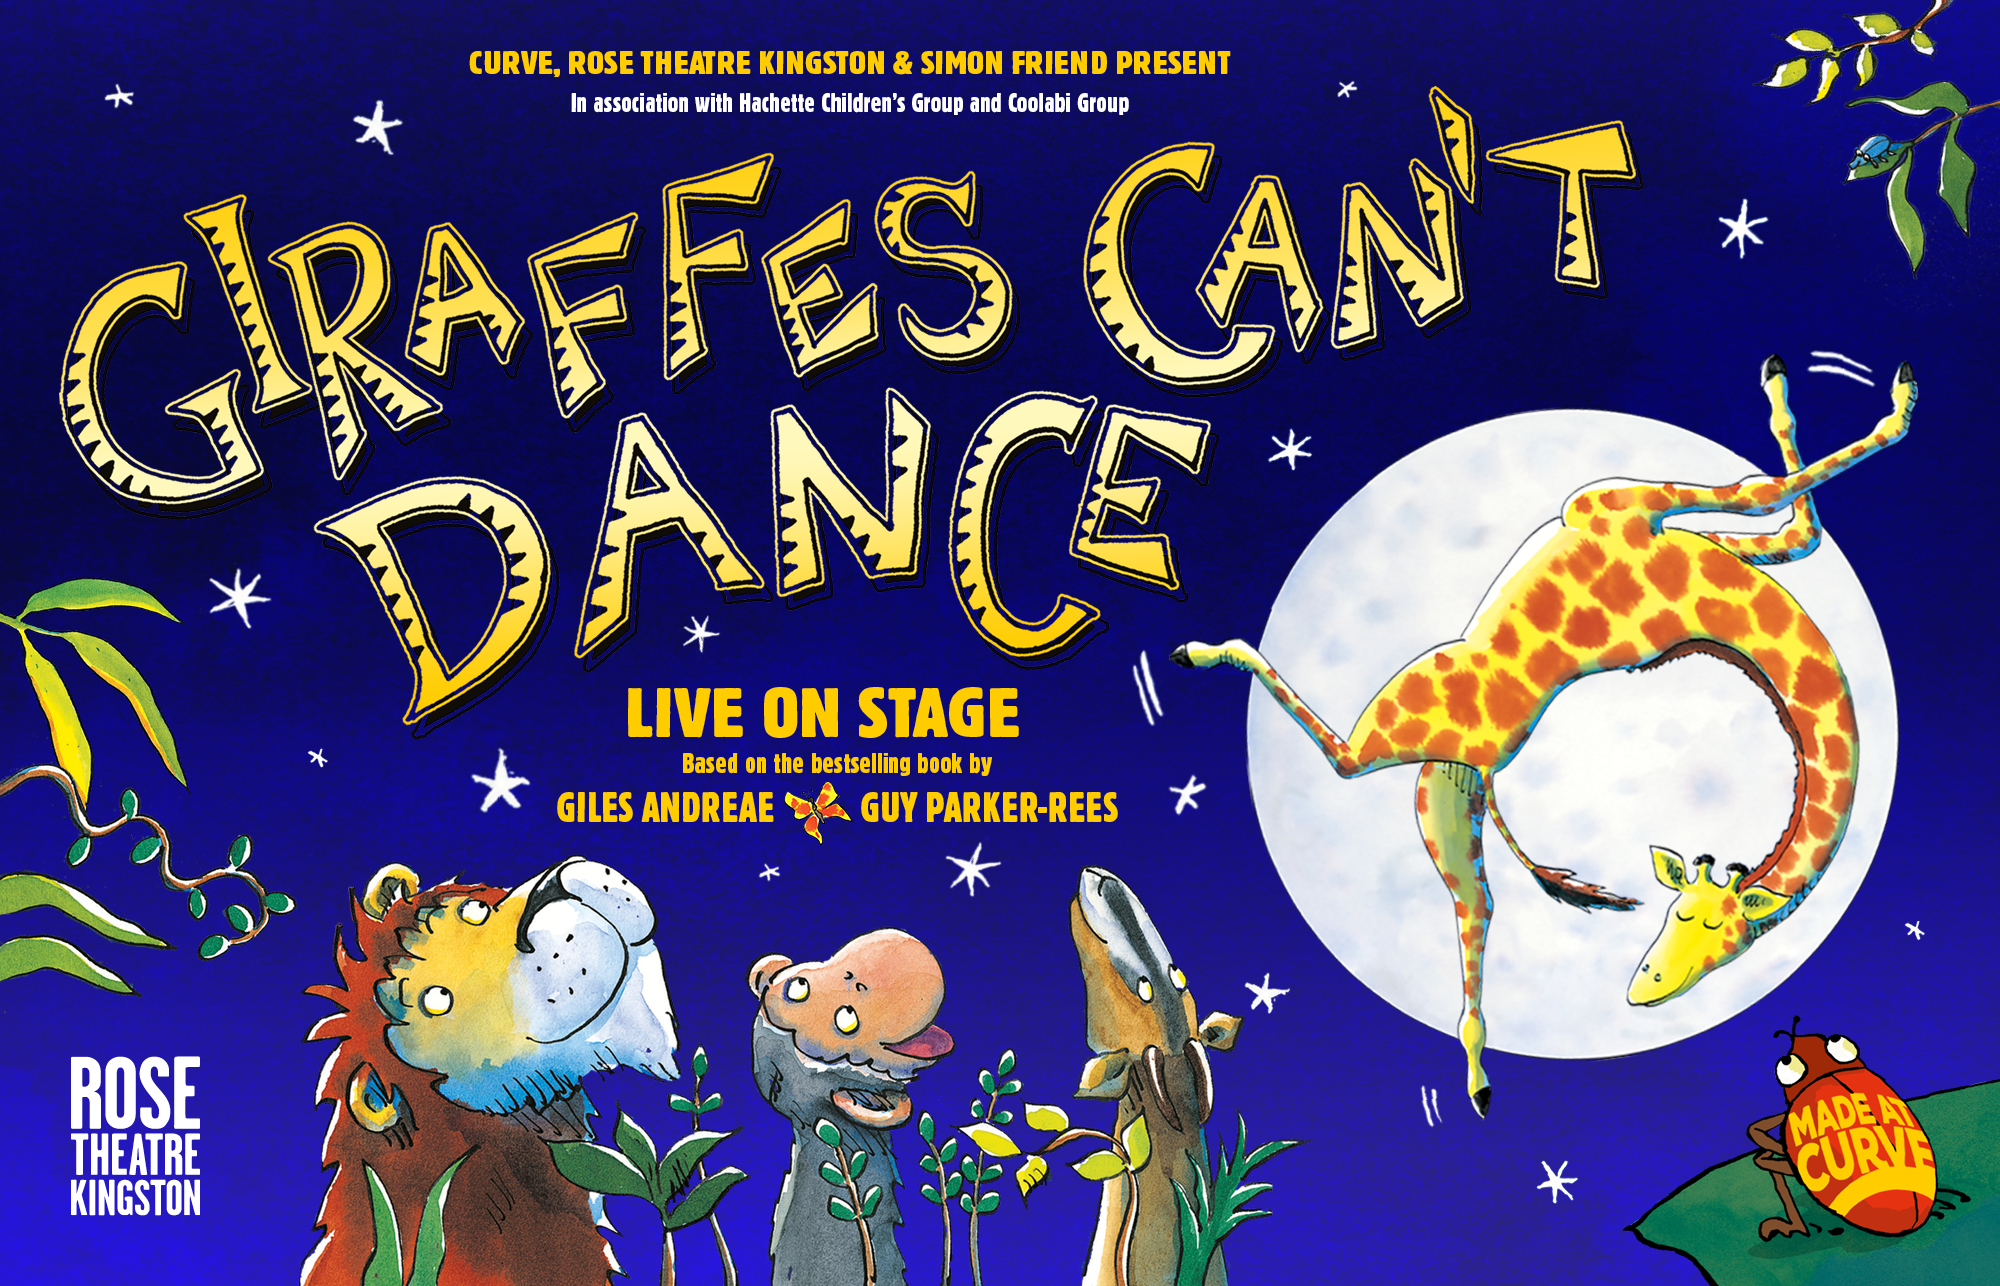 Giraffes Can't Dance, Live on Stage. Based on the bestselling book by Giles Andreae and Guy Parker-Rees.